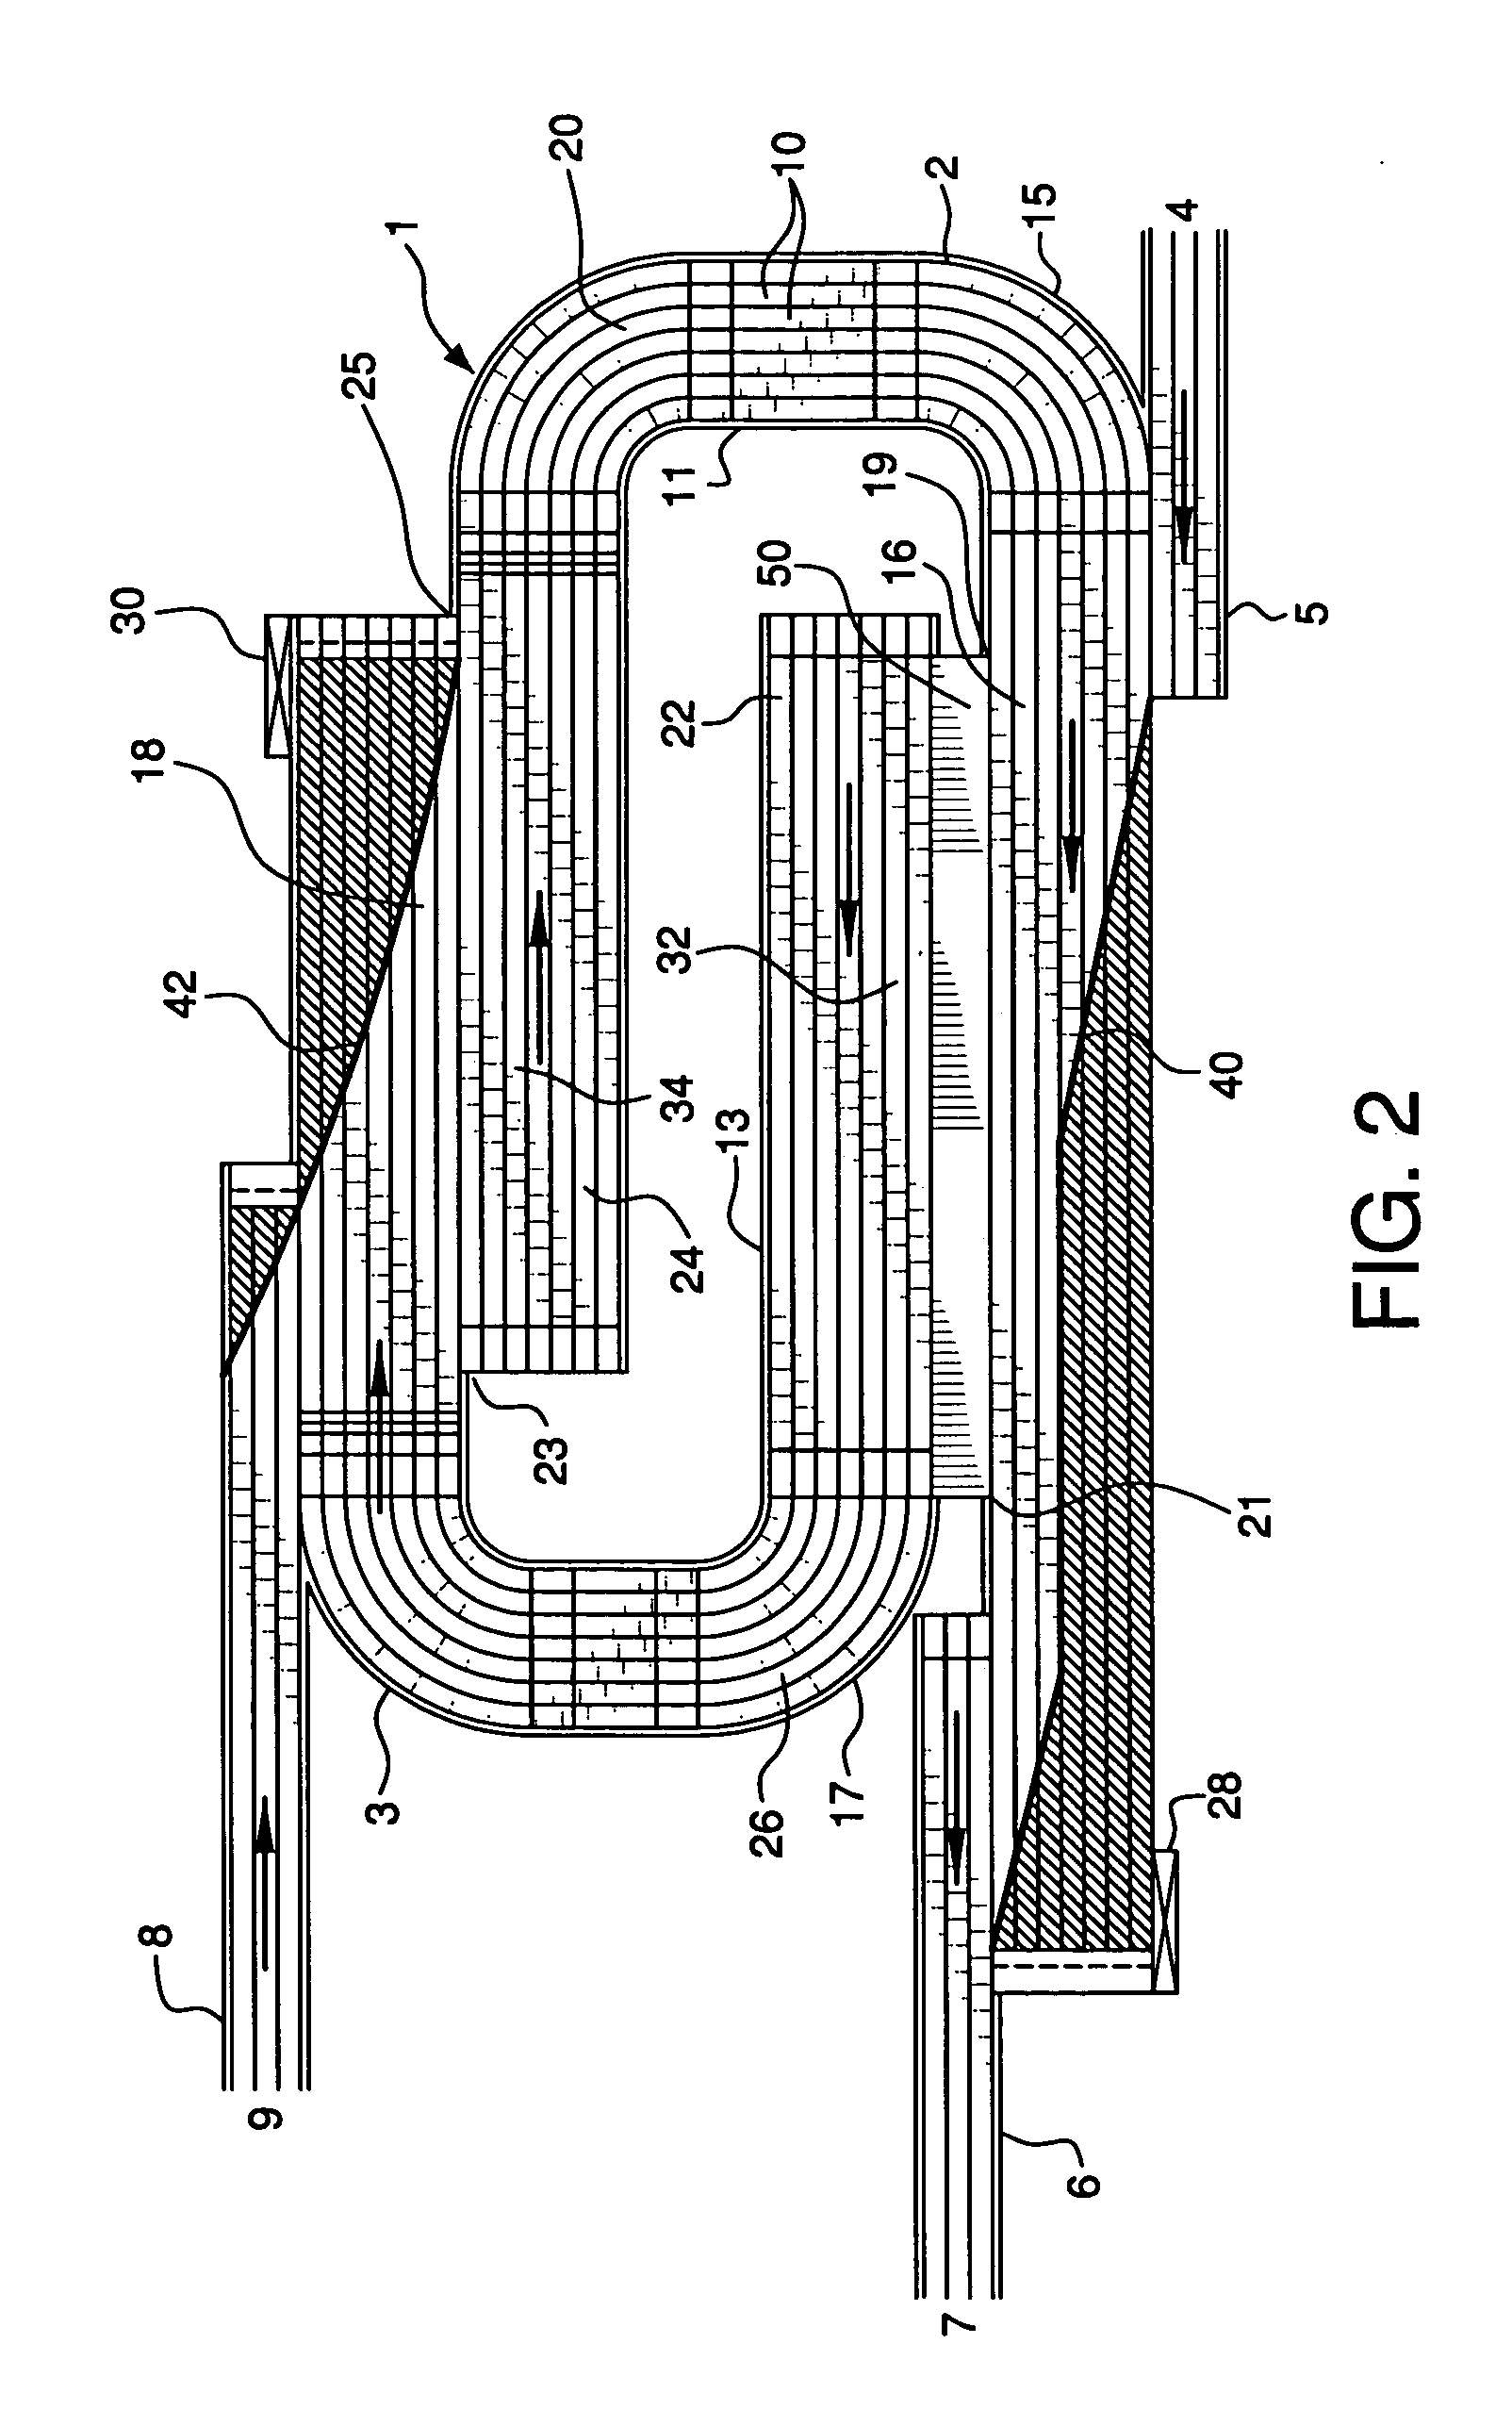 Dual conveyor product conveying and accumulation system